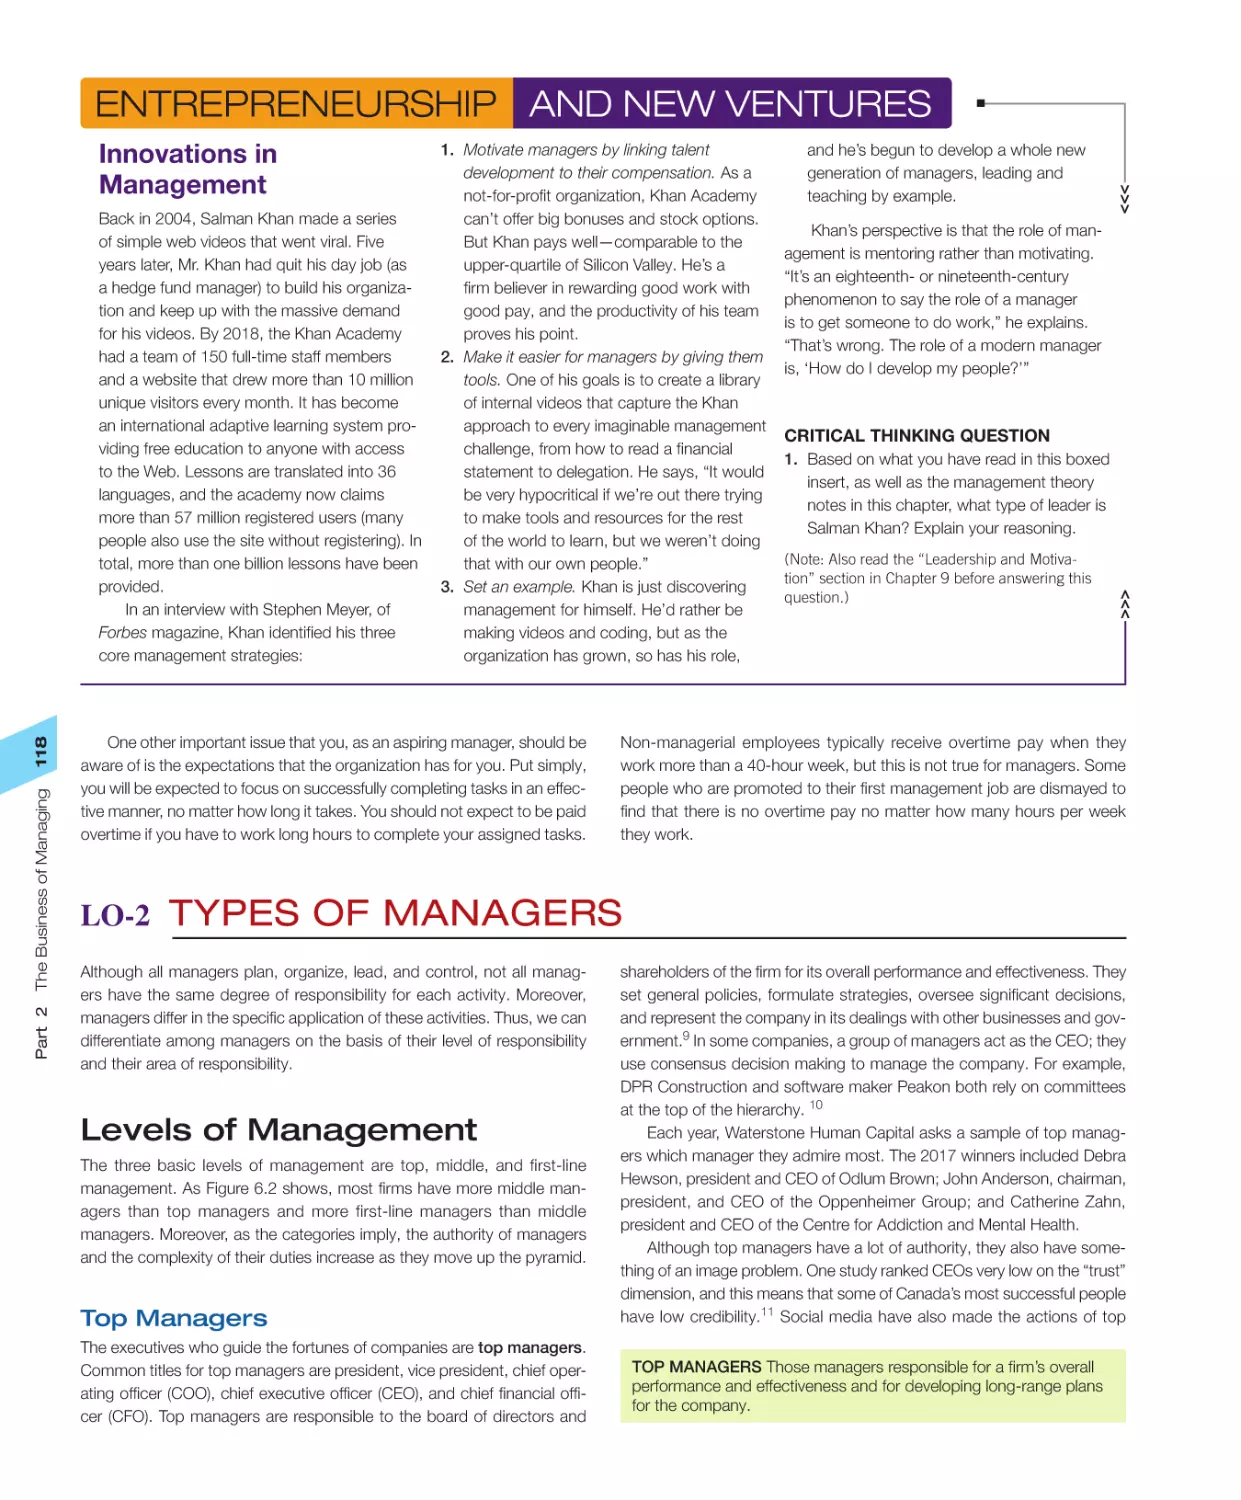 LO‐2 Types of Managers